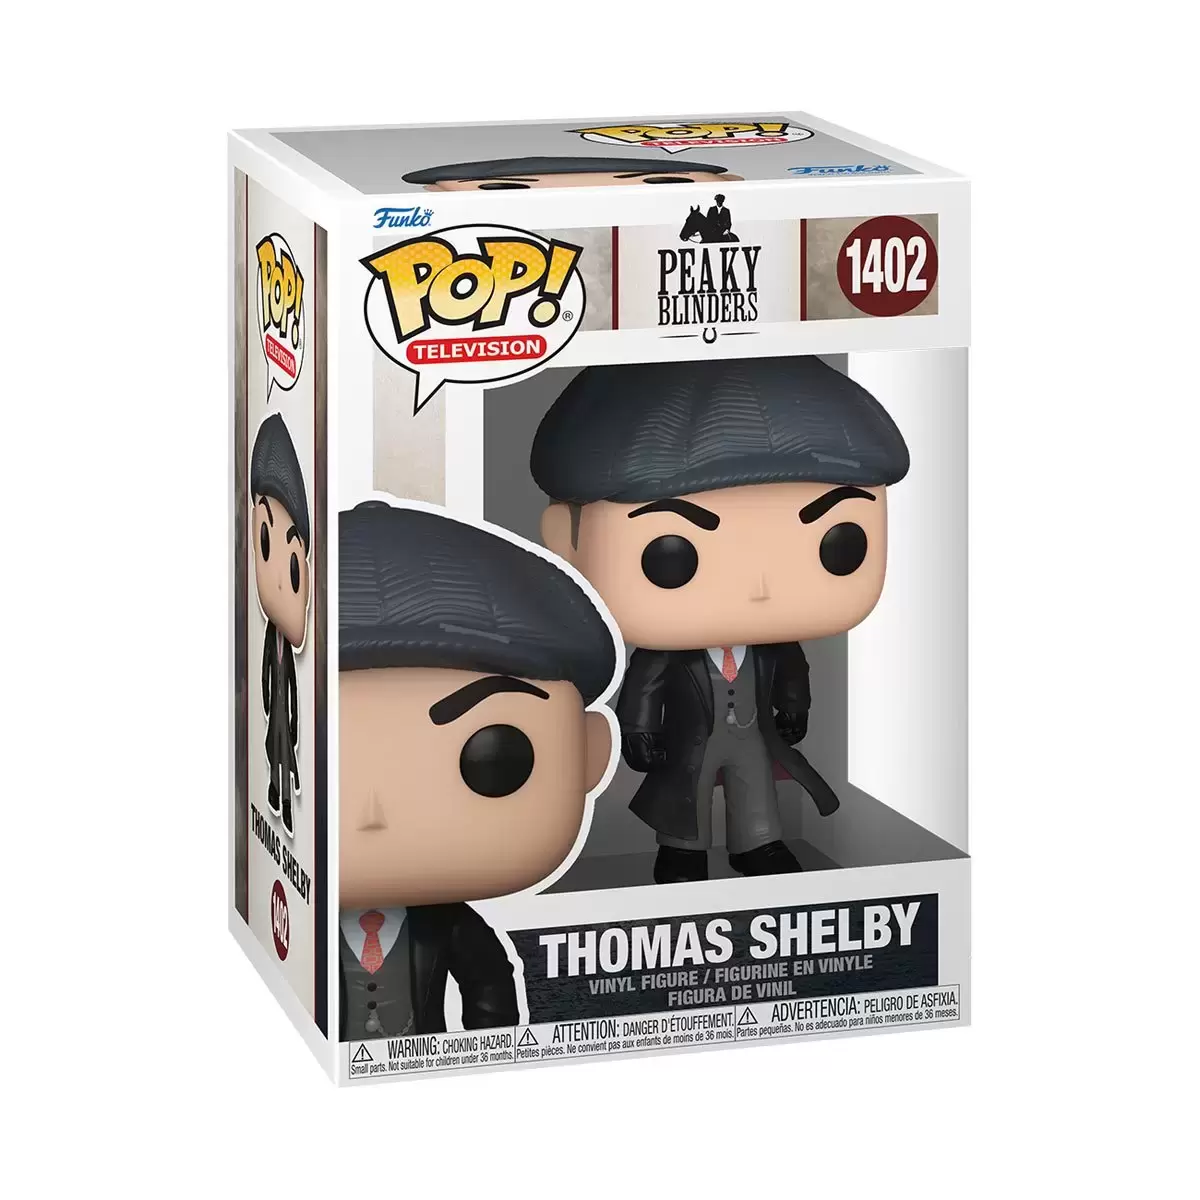 POP! Television - Peaky Blinders - Thomas Shelby